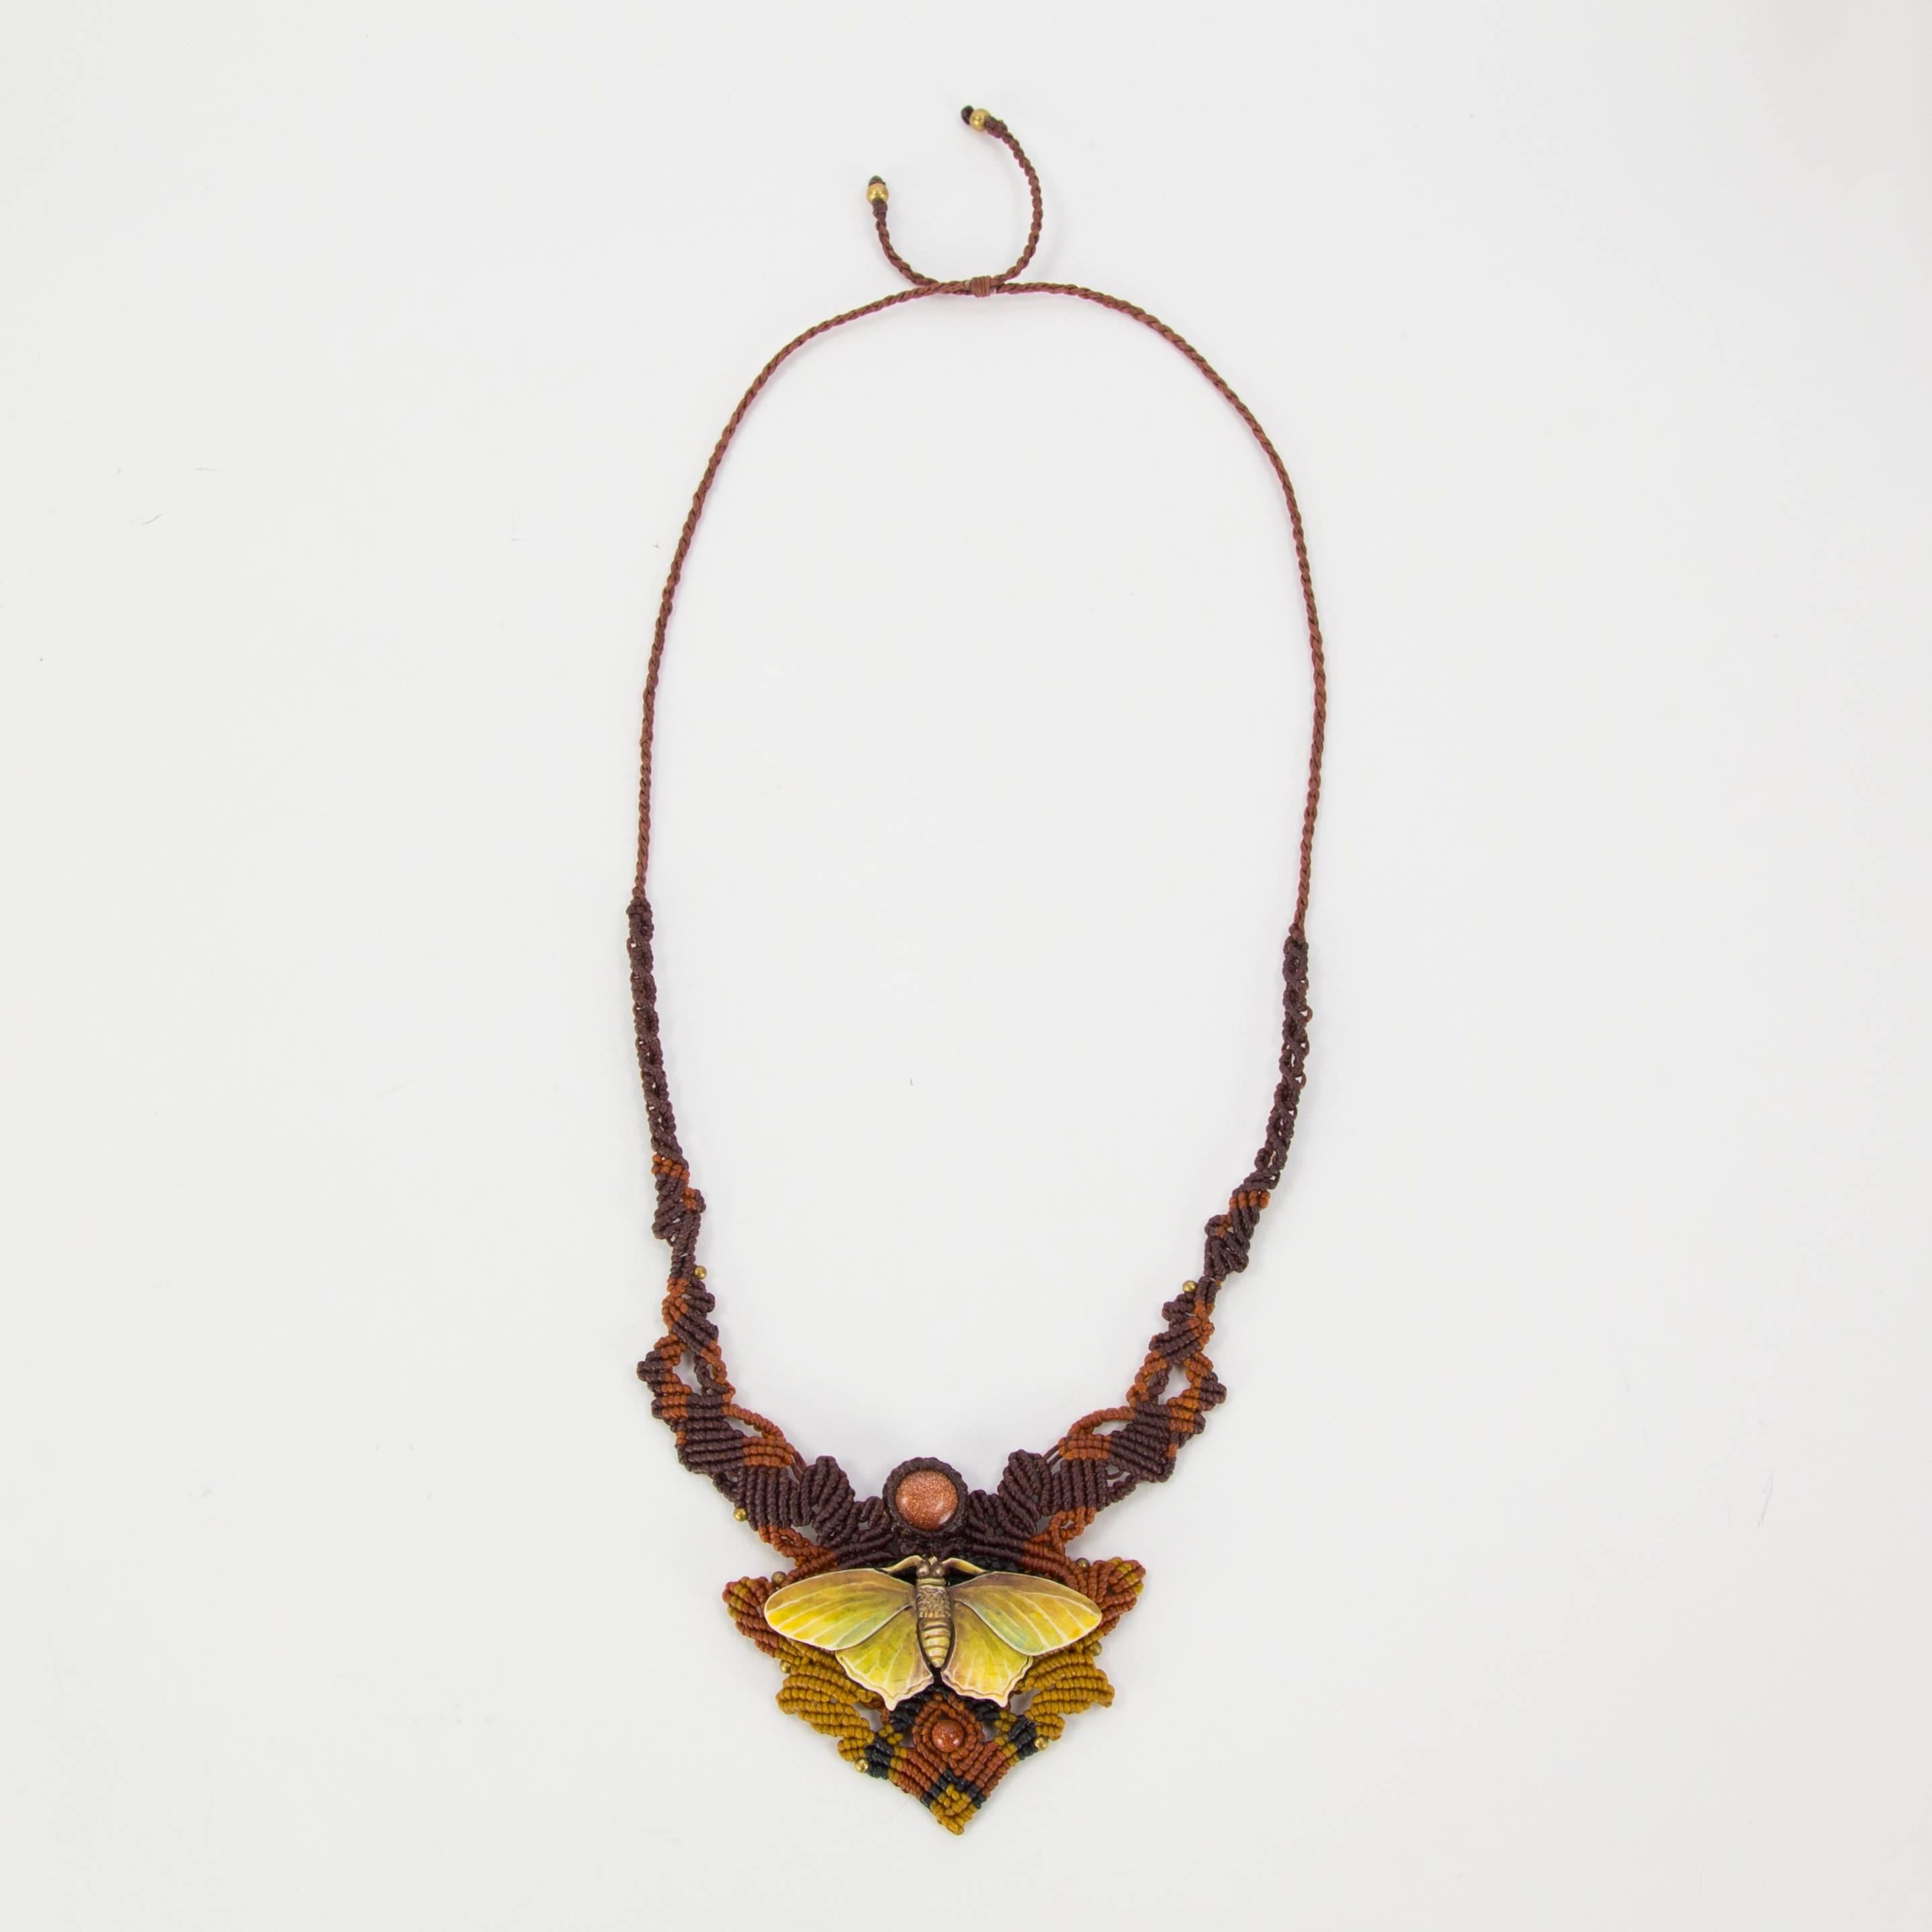 This beautiful necklace is hand carved bone and hand colored by a master Balinese painter, it speaks to the thrill of a butterfly landing on an outstretched finger and a sense of awe that moment brings, likened to a Garden Kiss. Set on an intricate